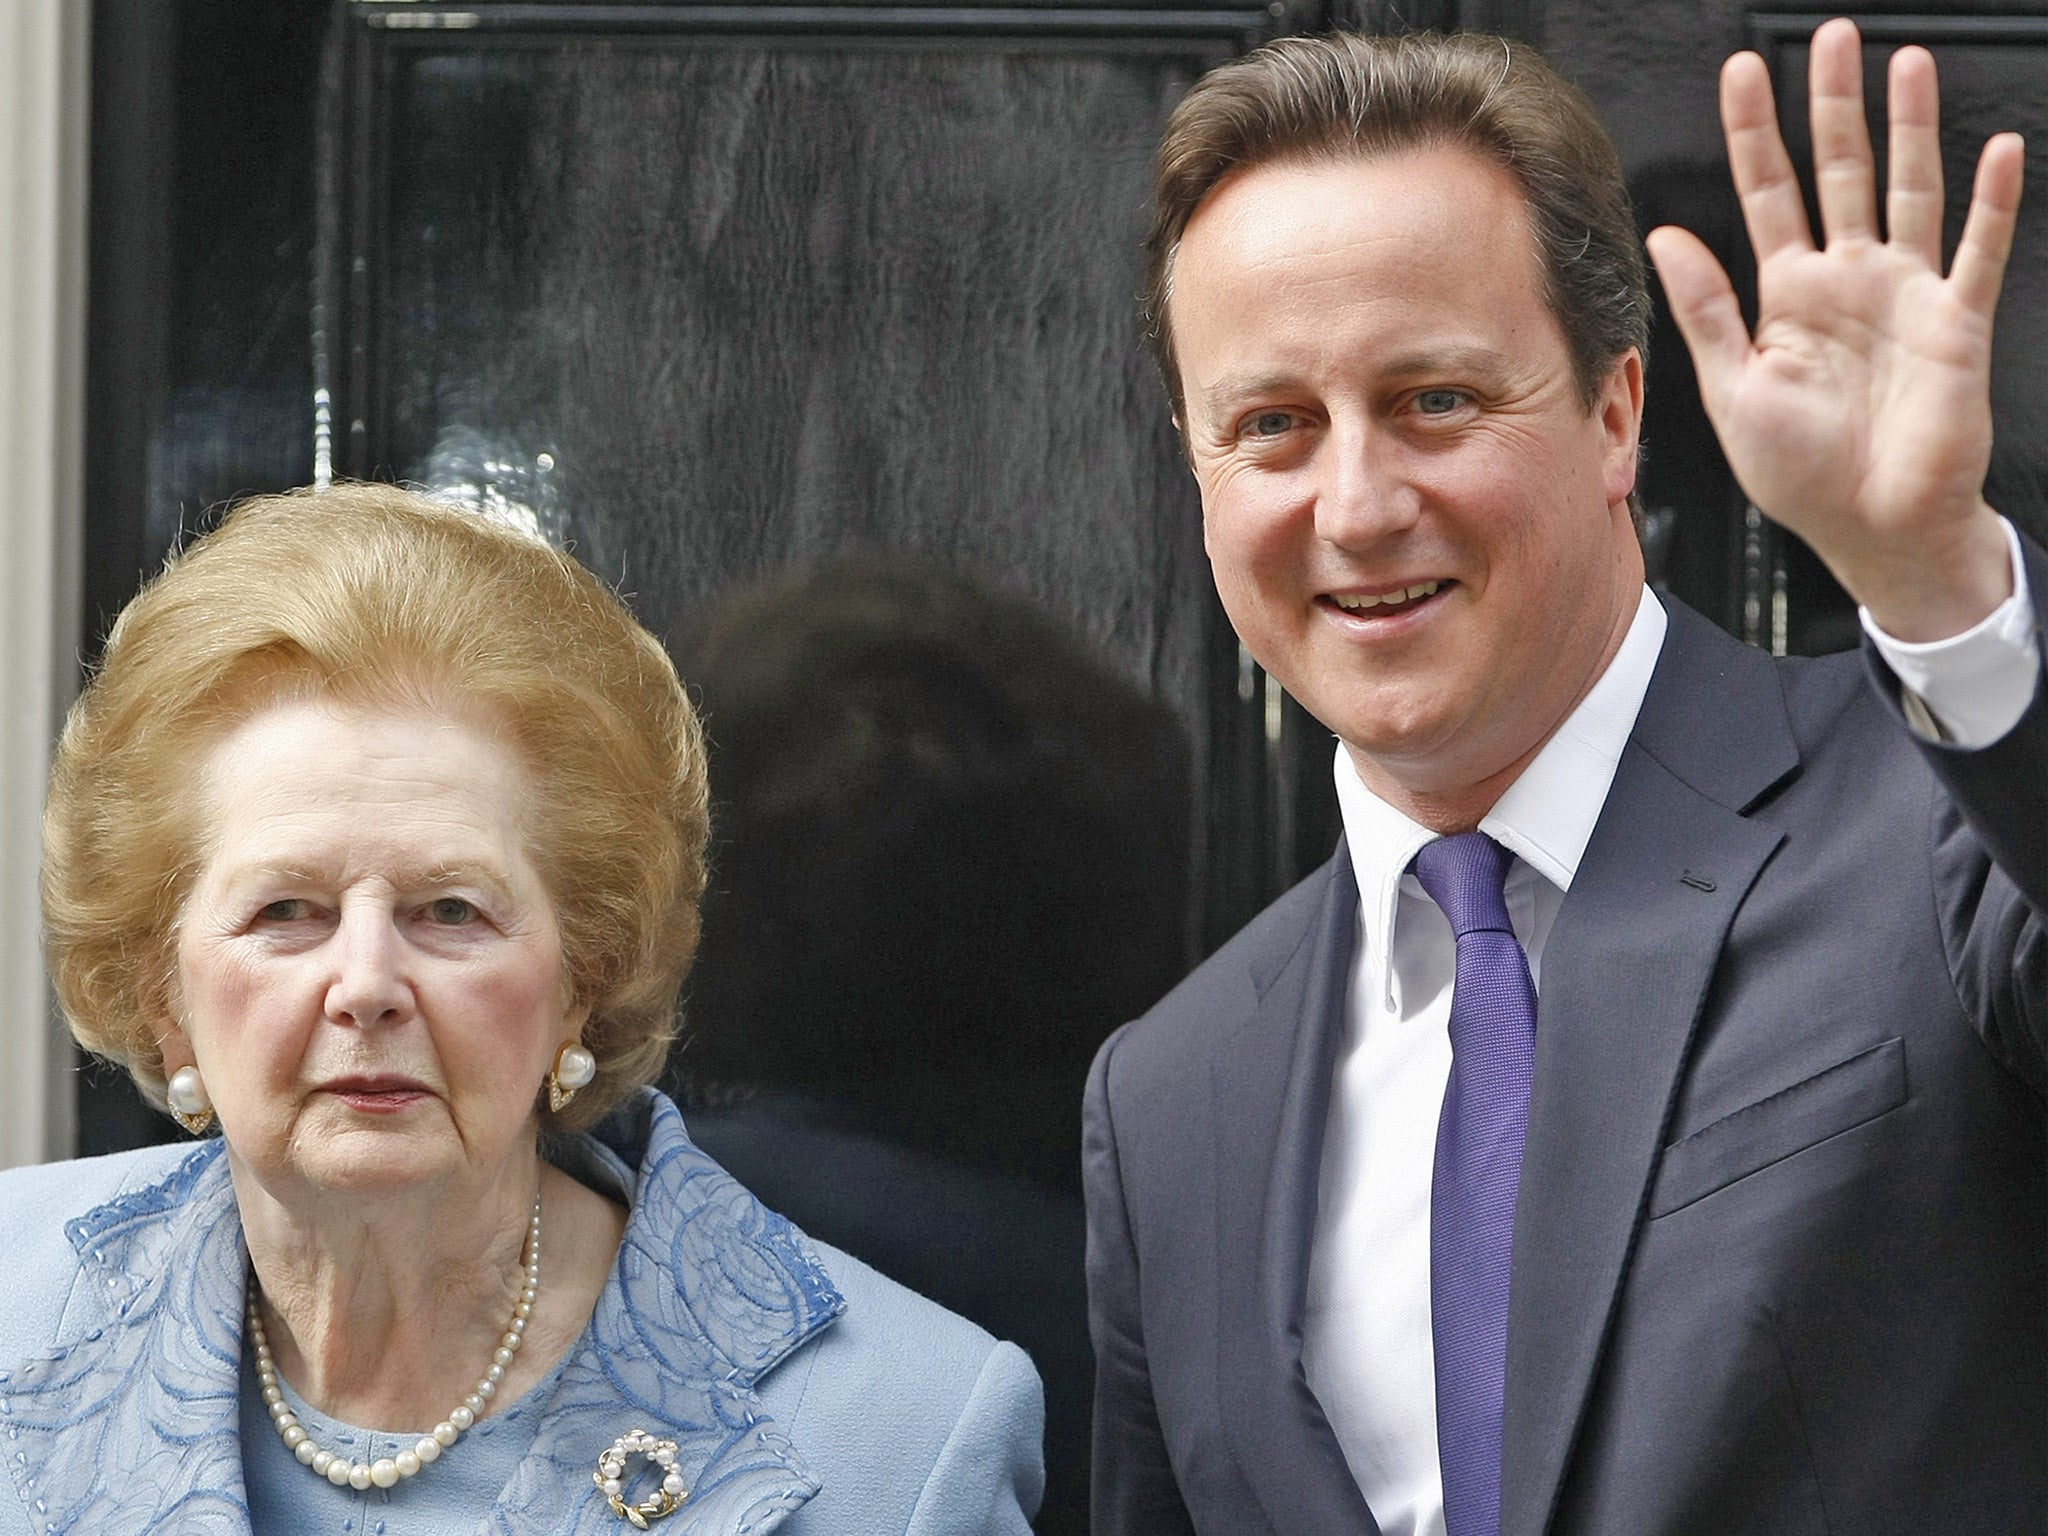 For many non-Tory voters, Thatcher personified the 'nasty party' Cameron promised to detoxify